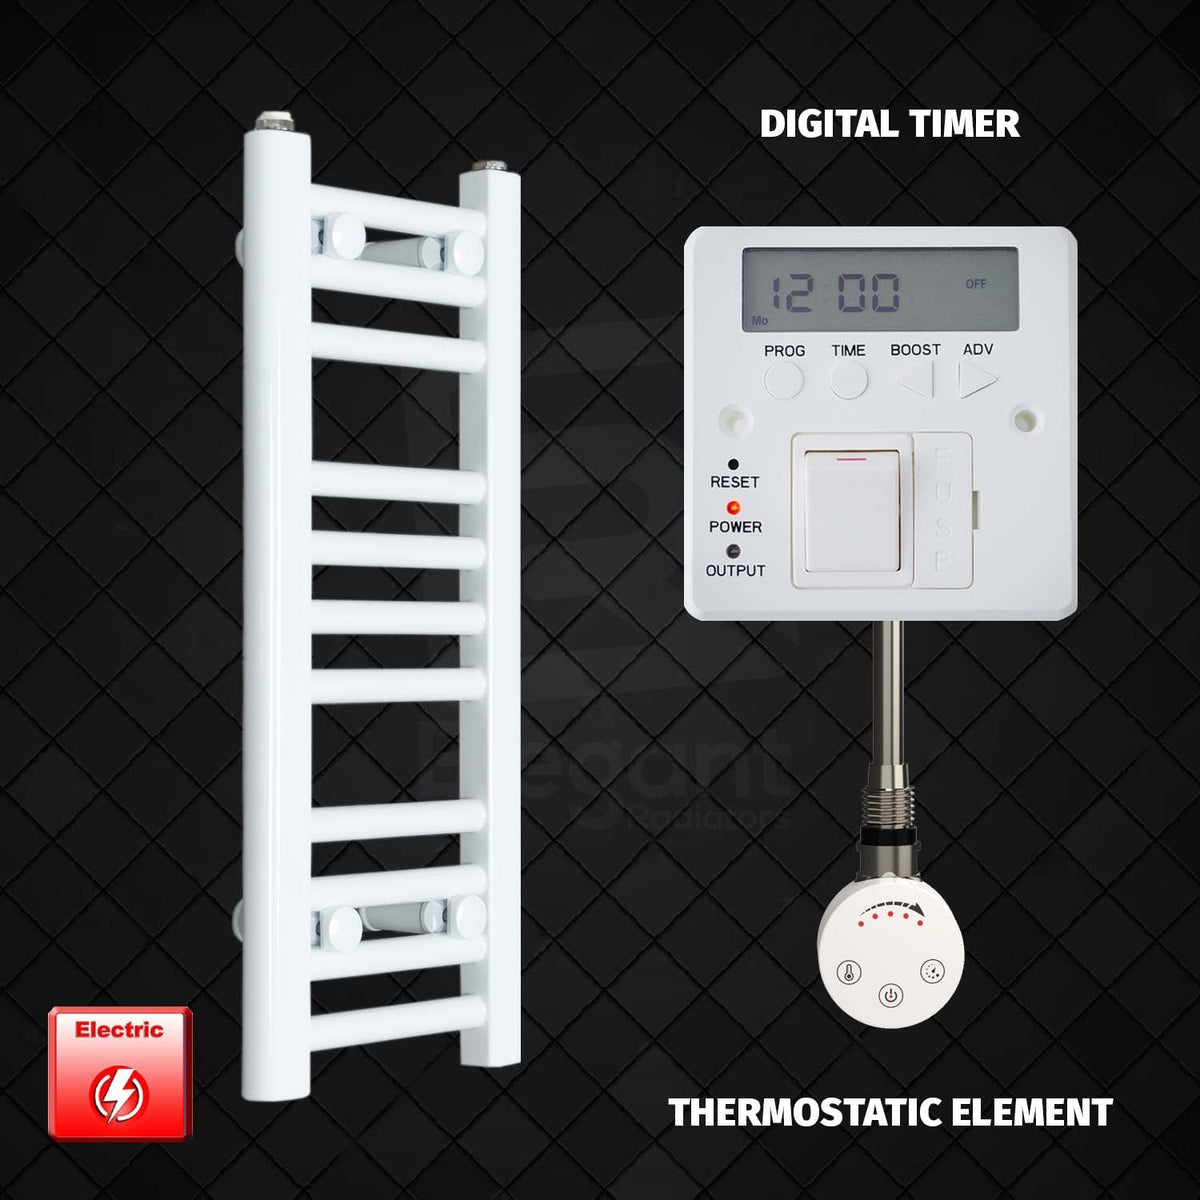 600 mm High 300 mm Wide Pre-Filled Electric Heated Towel Rail Radiator White Digital timer Thermostatic Element